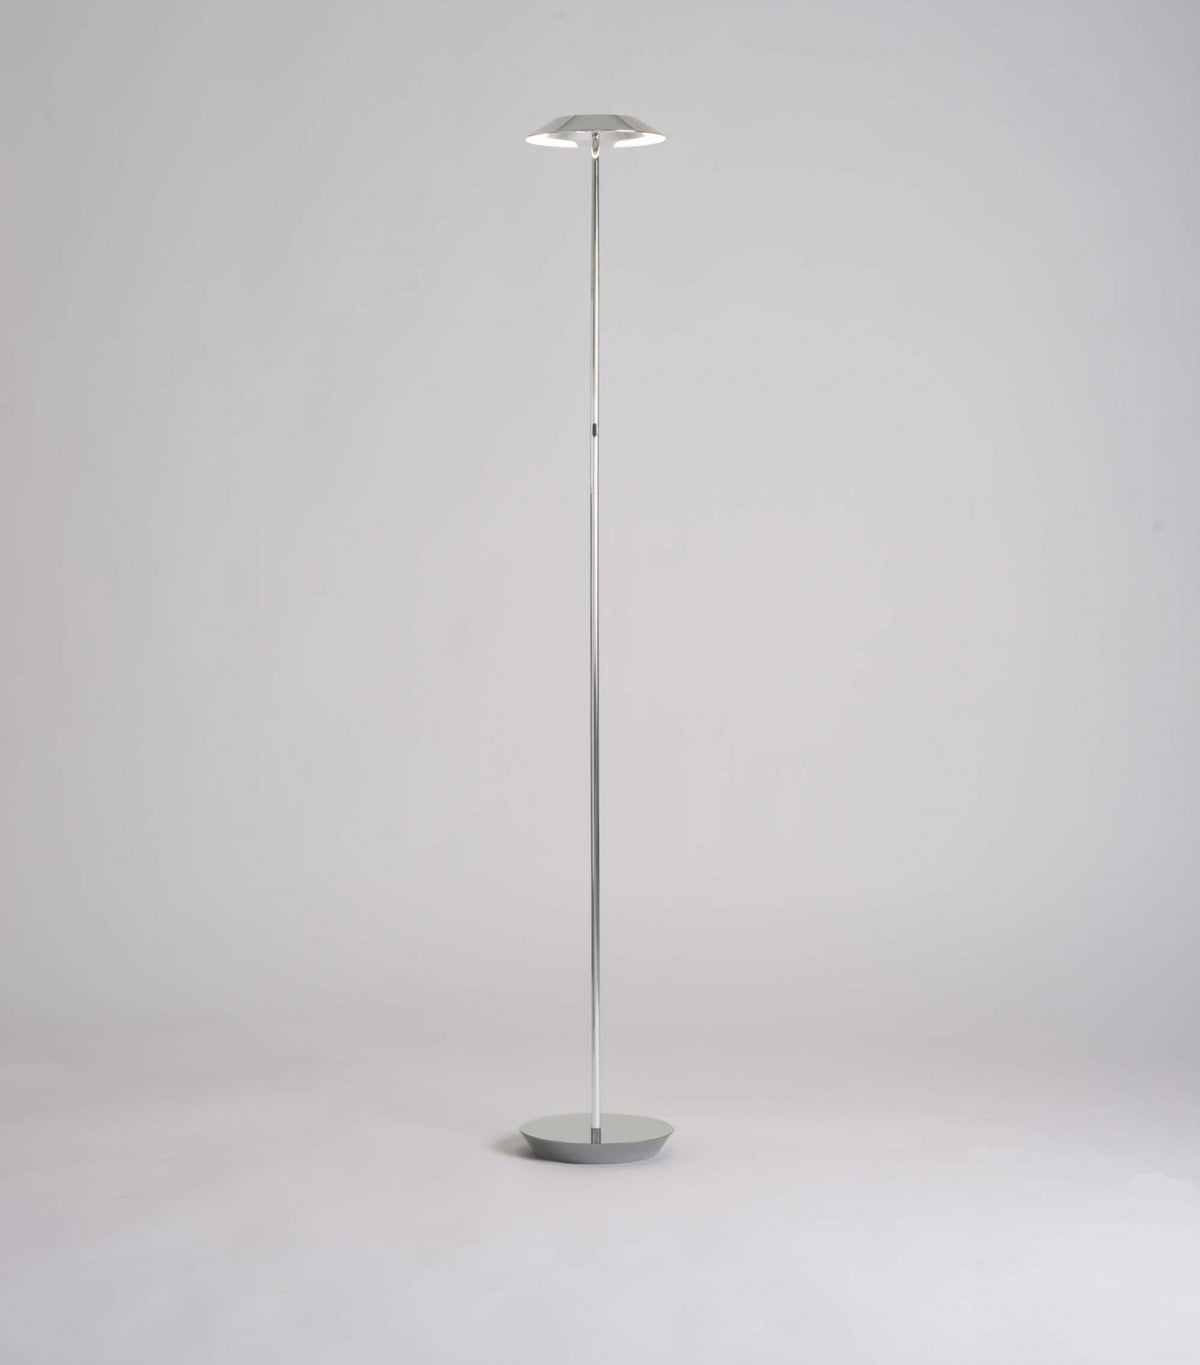 Royyo LED floor lamp in silver with silver base plate from Koncept lighting